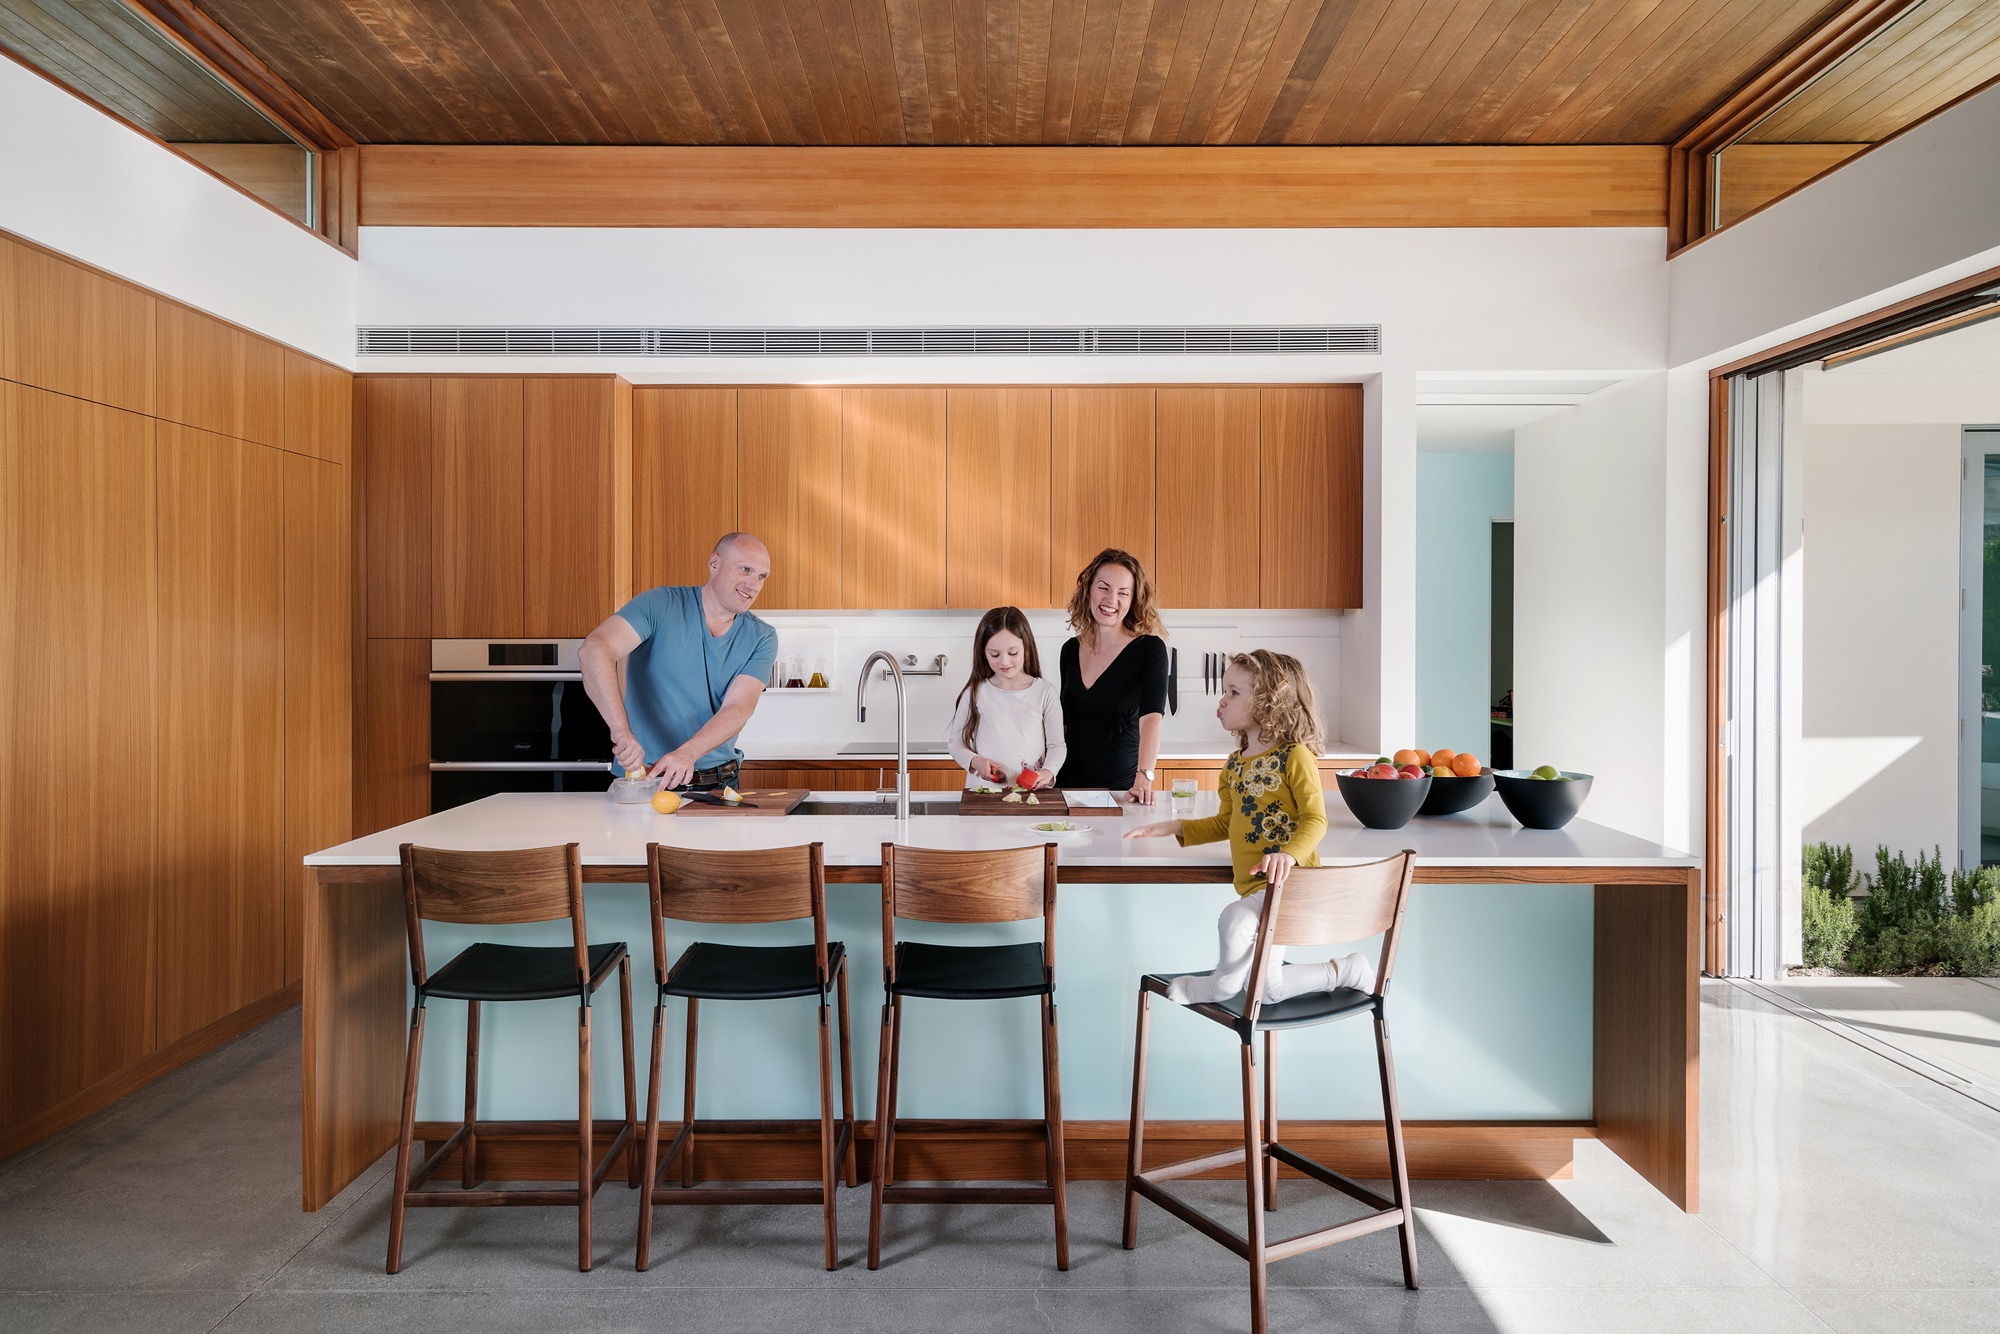 A family prepares food at a kitchen island